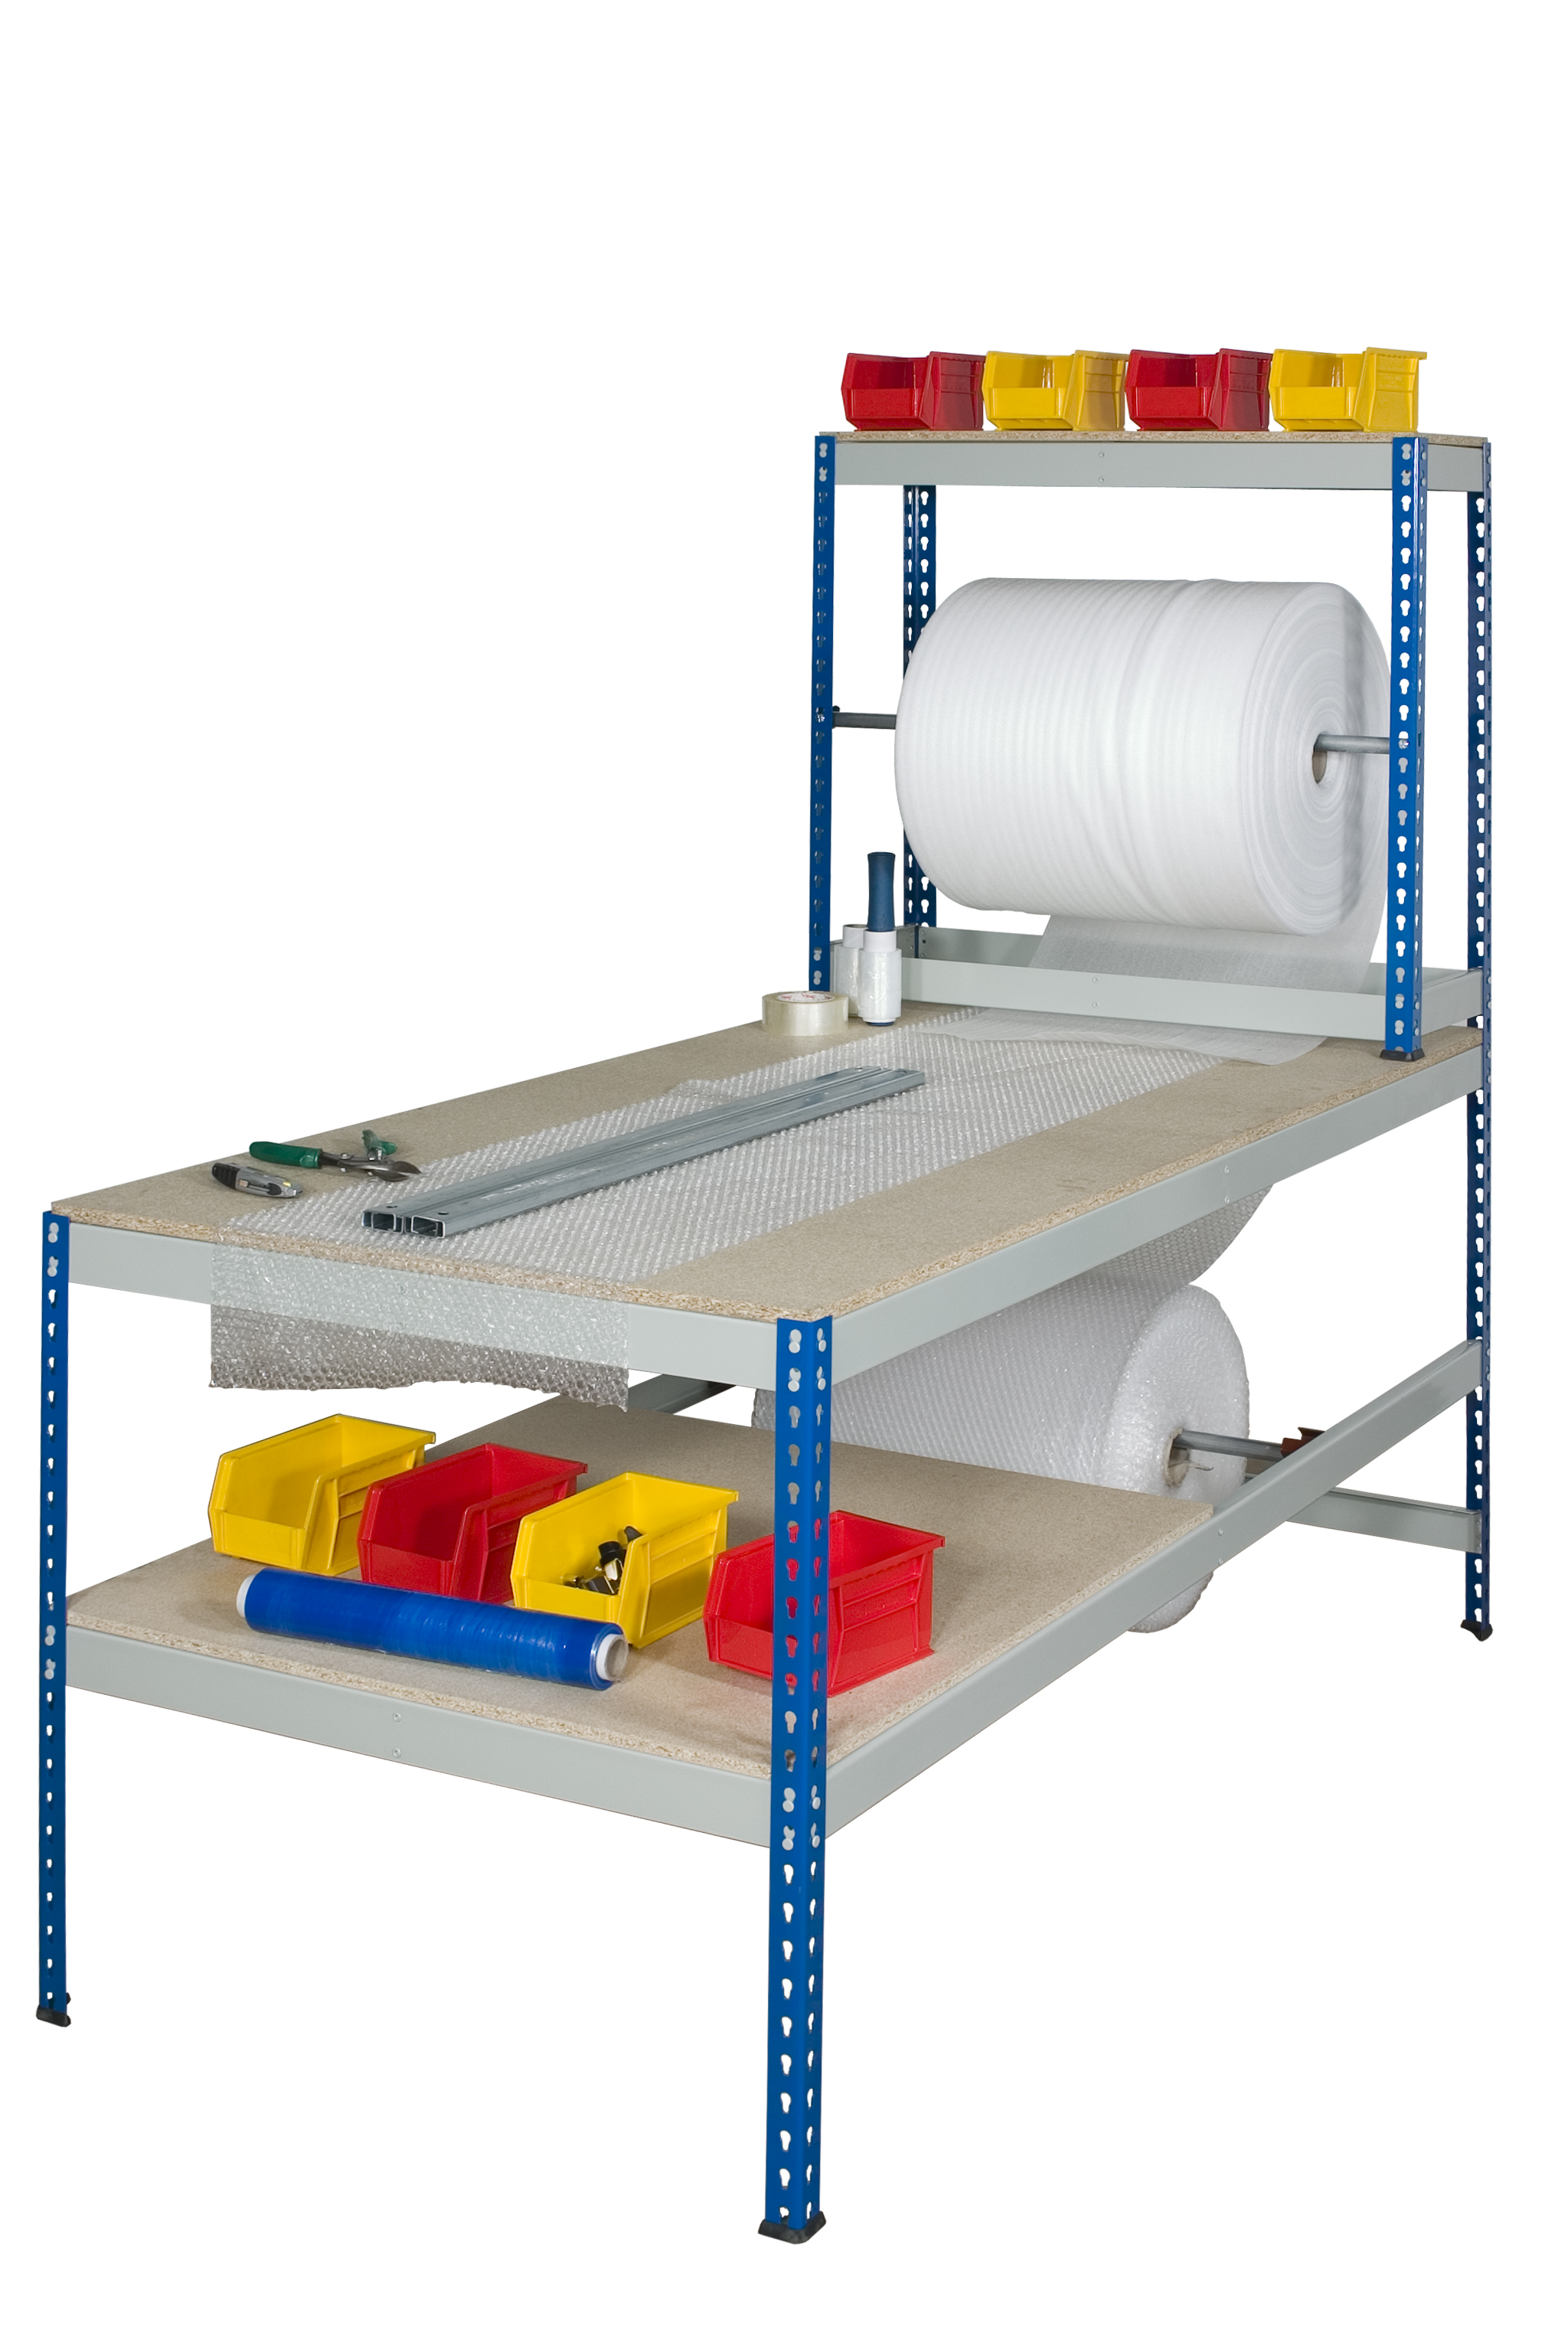 Rivet Racking Style Packing Benches